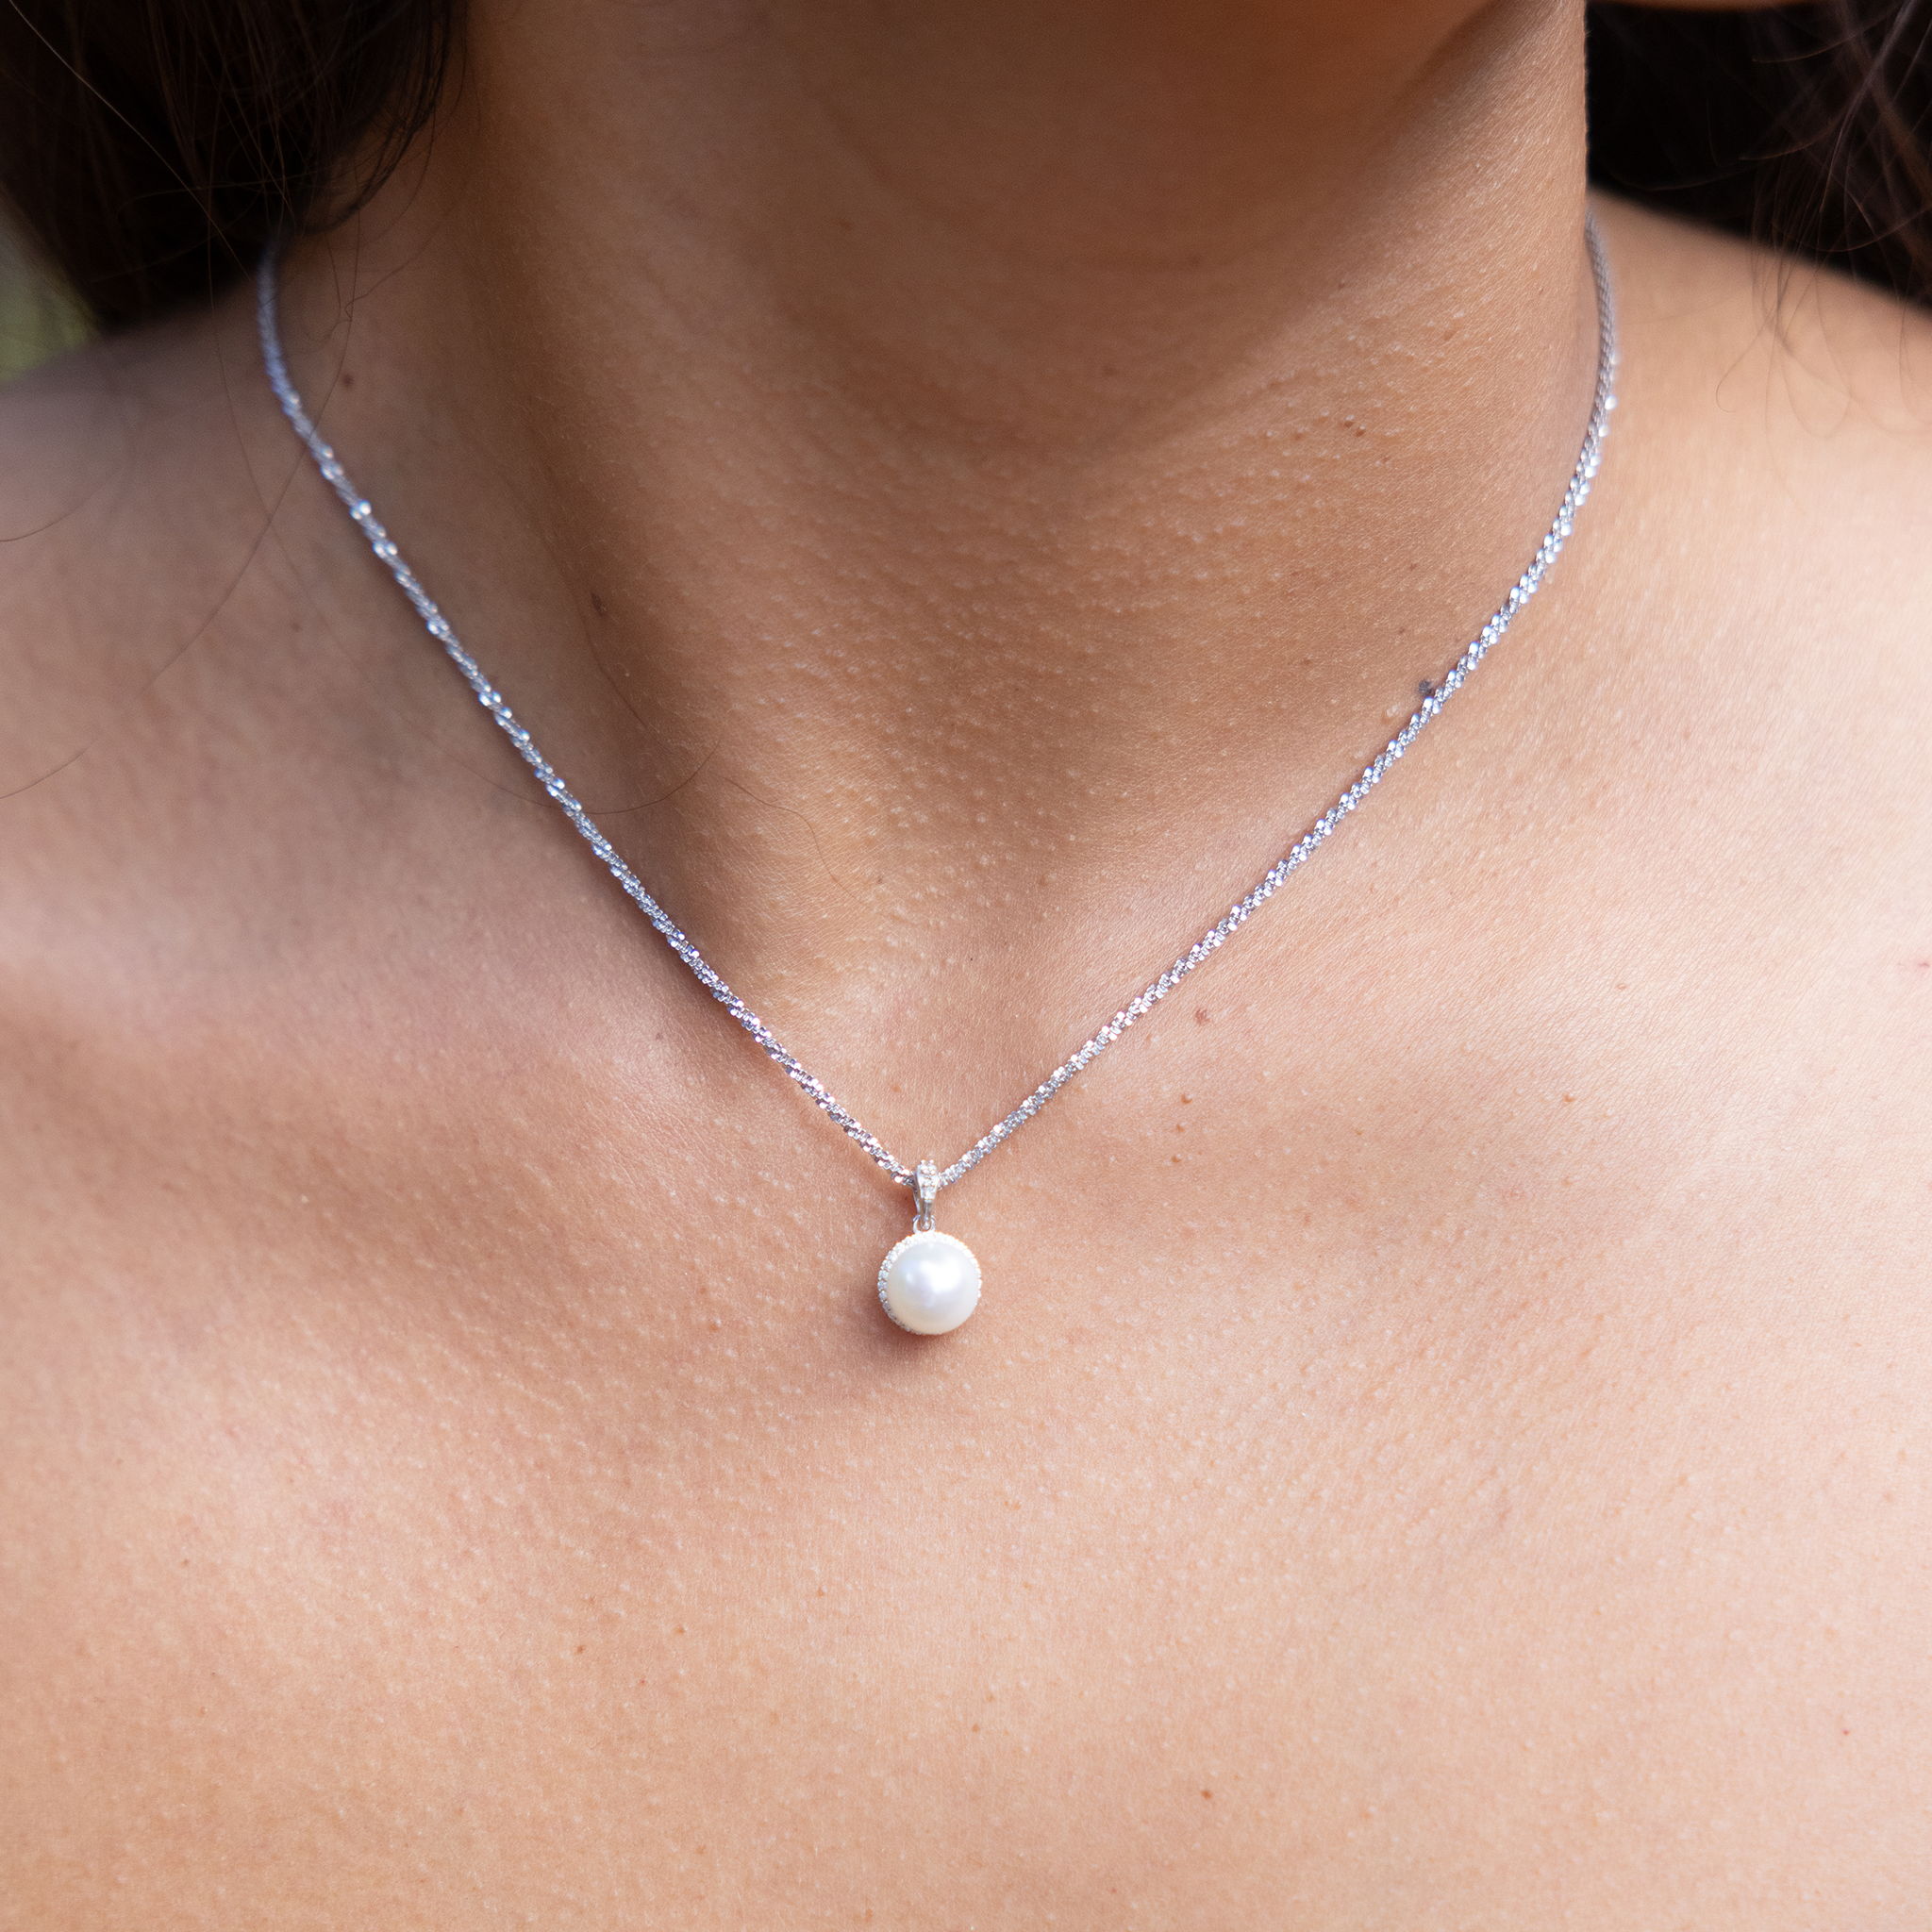 Halo Akoya White Pearl Pendant in White Gold with Diamonds - 8-8.5mm